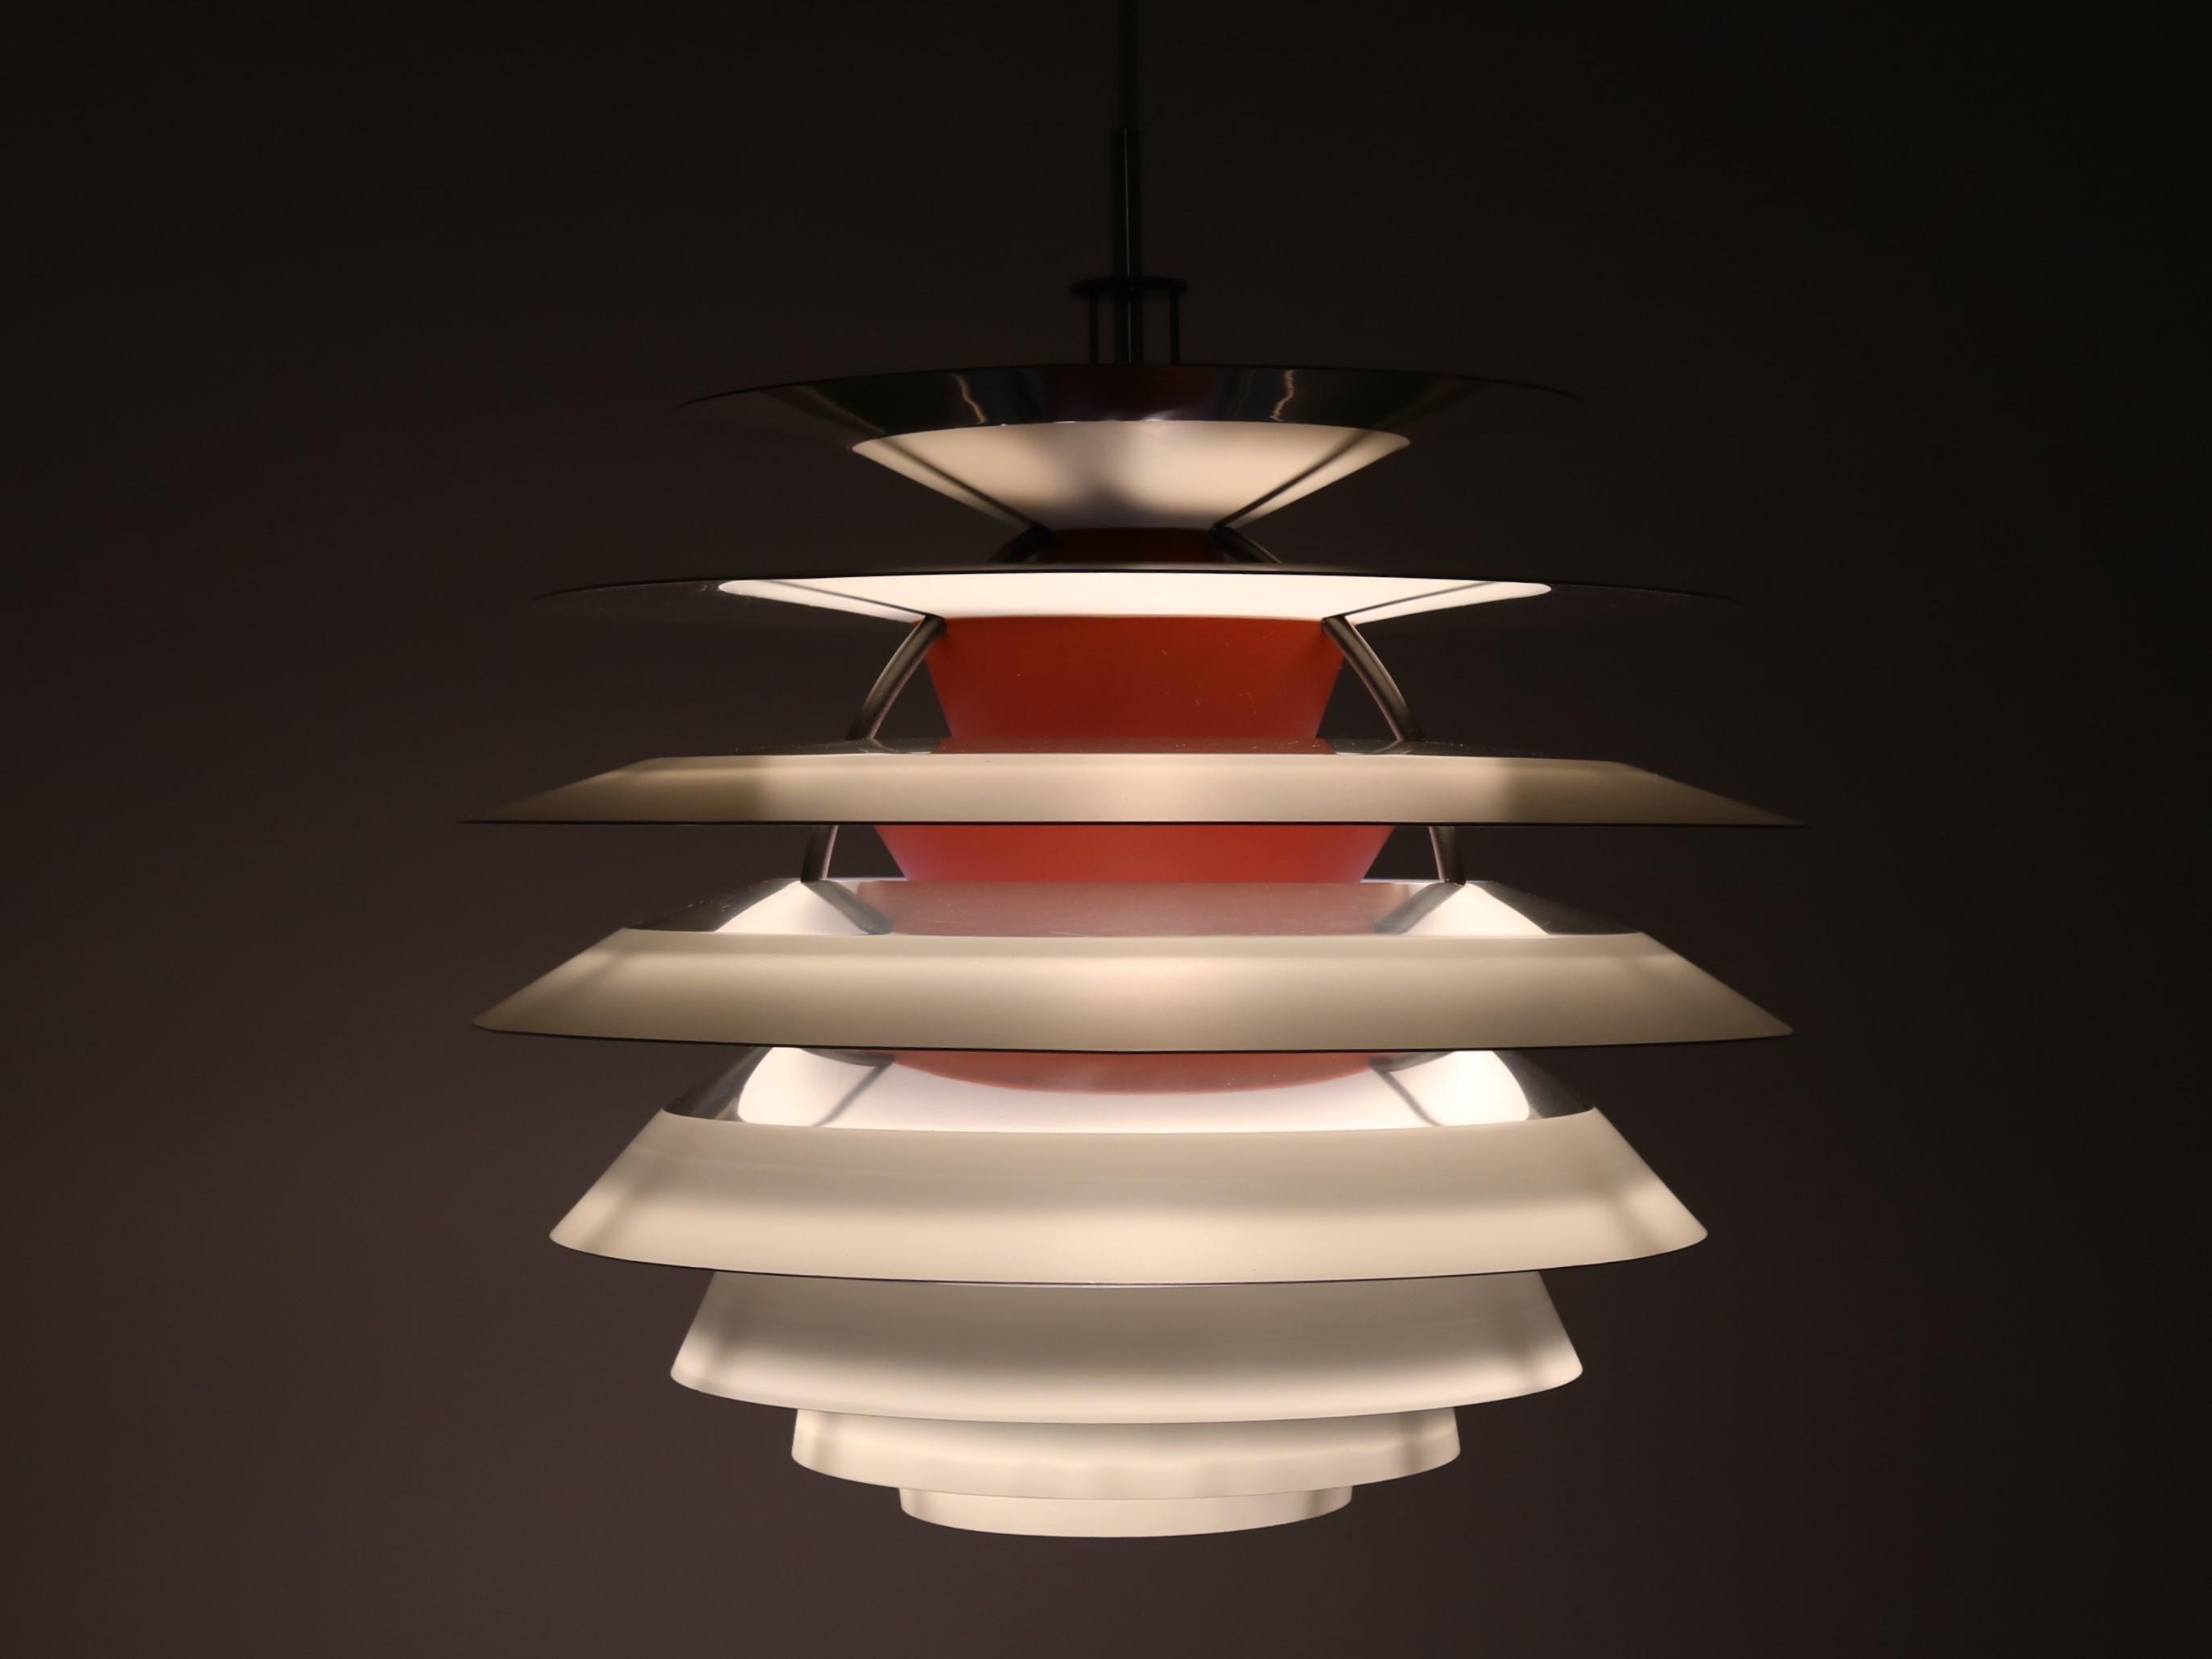 Iconic piece of design from Poul Henningsen. The PH Kontrast pendant lamp was designed by Poul Henningsen for Louis Poulsen, Denmark, 1958-1962. Poul Henningsens masterpiece, the PH Kontrast consists of ten shades. Each shade has four different